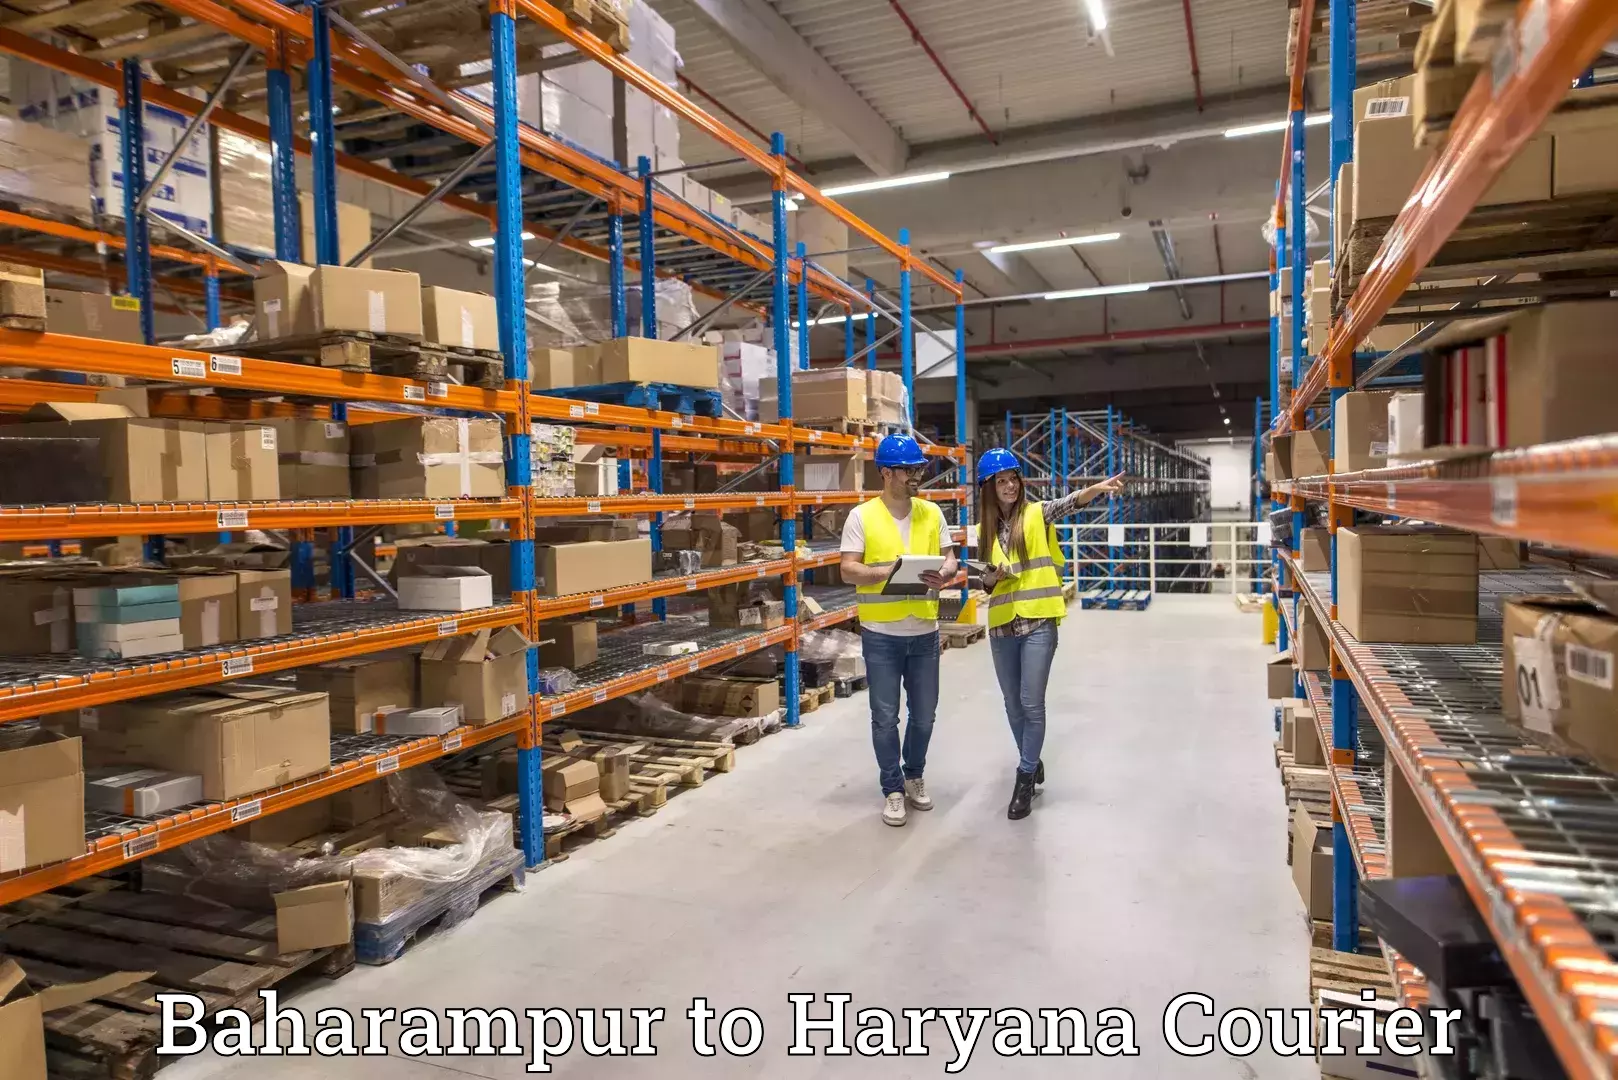 User-friendly courier app Baharampur to NCR Haryana